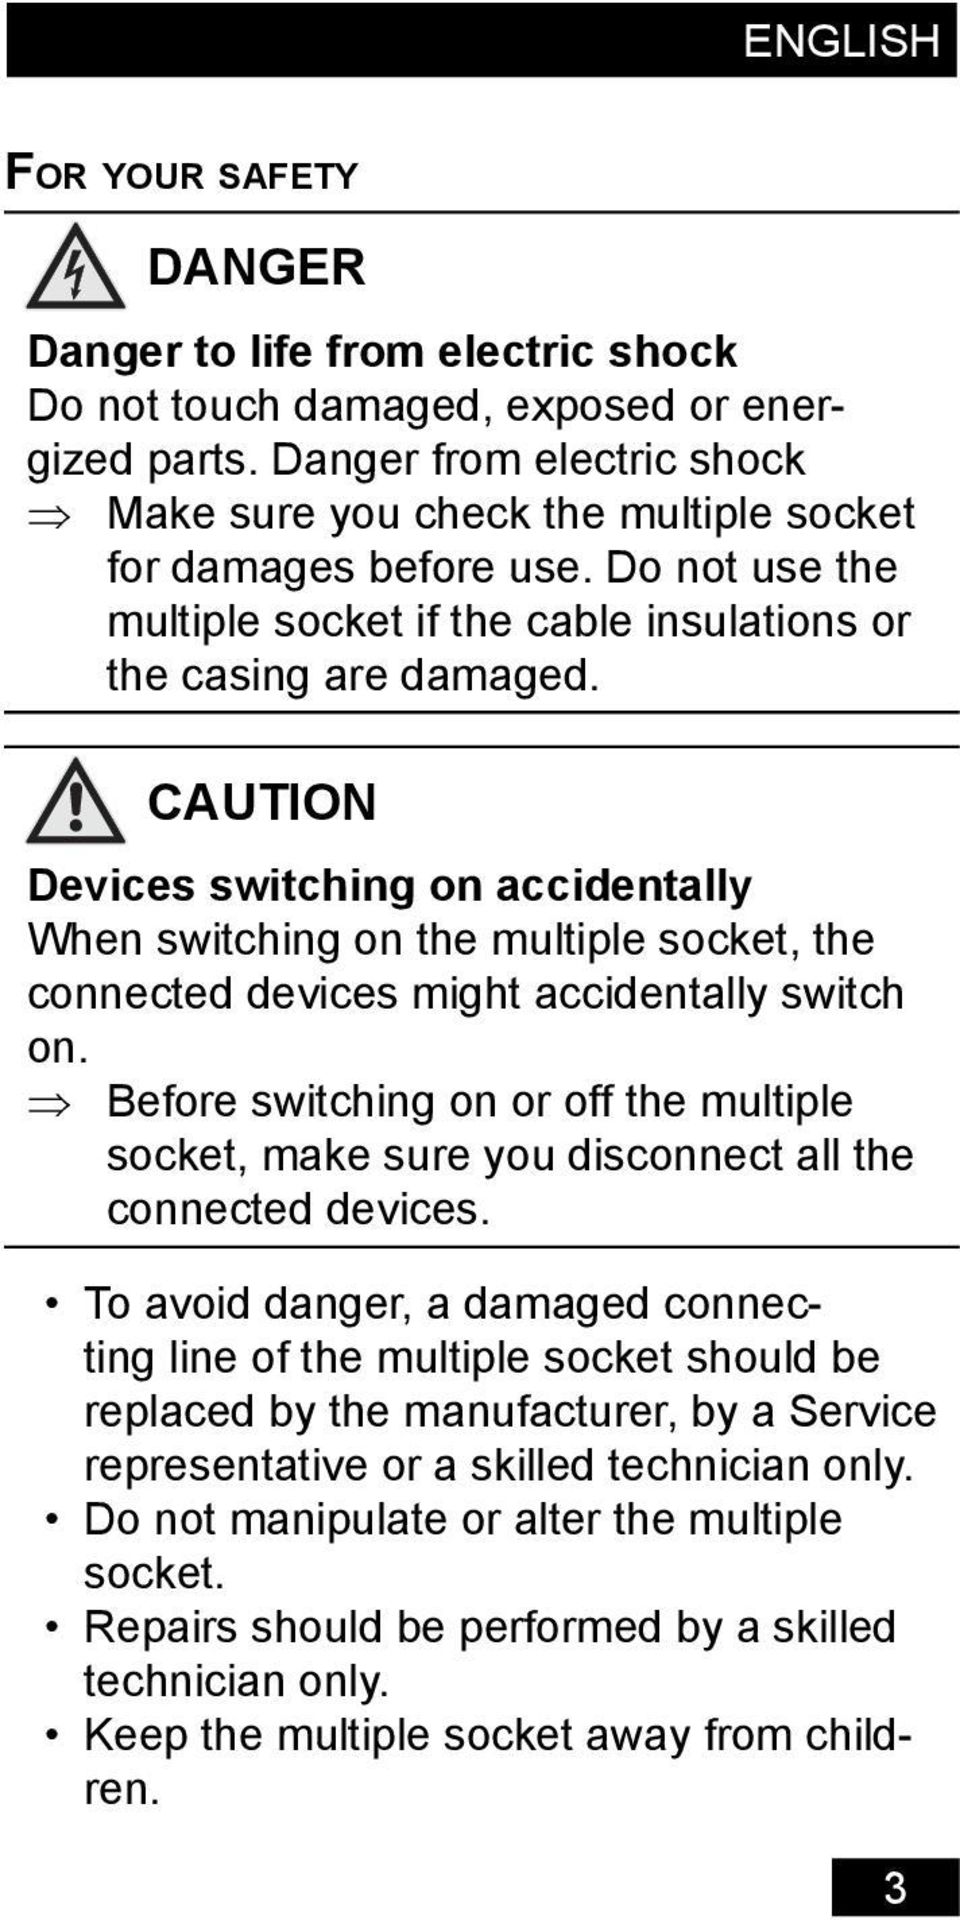 CAUTION Devices switching on accidentally When switching on the multiple socket, the connected devices might accidentally switch on.